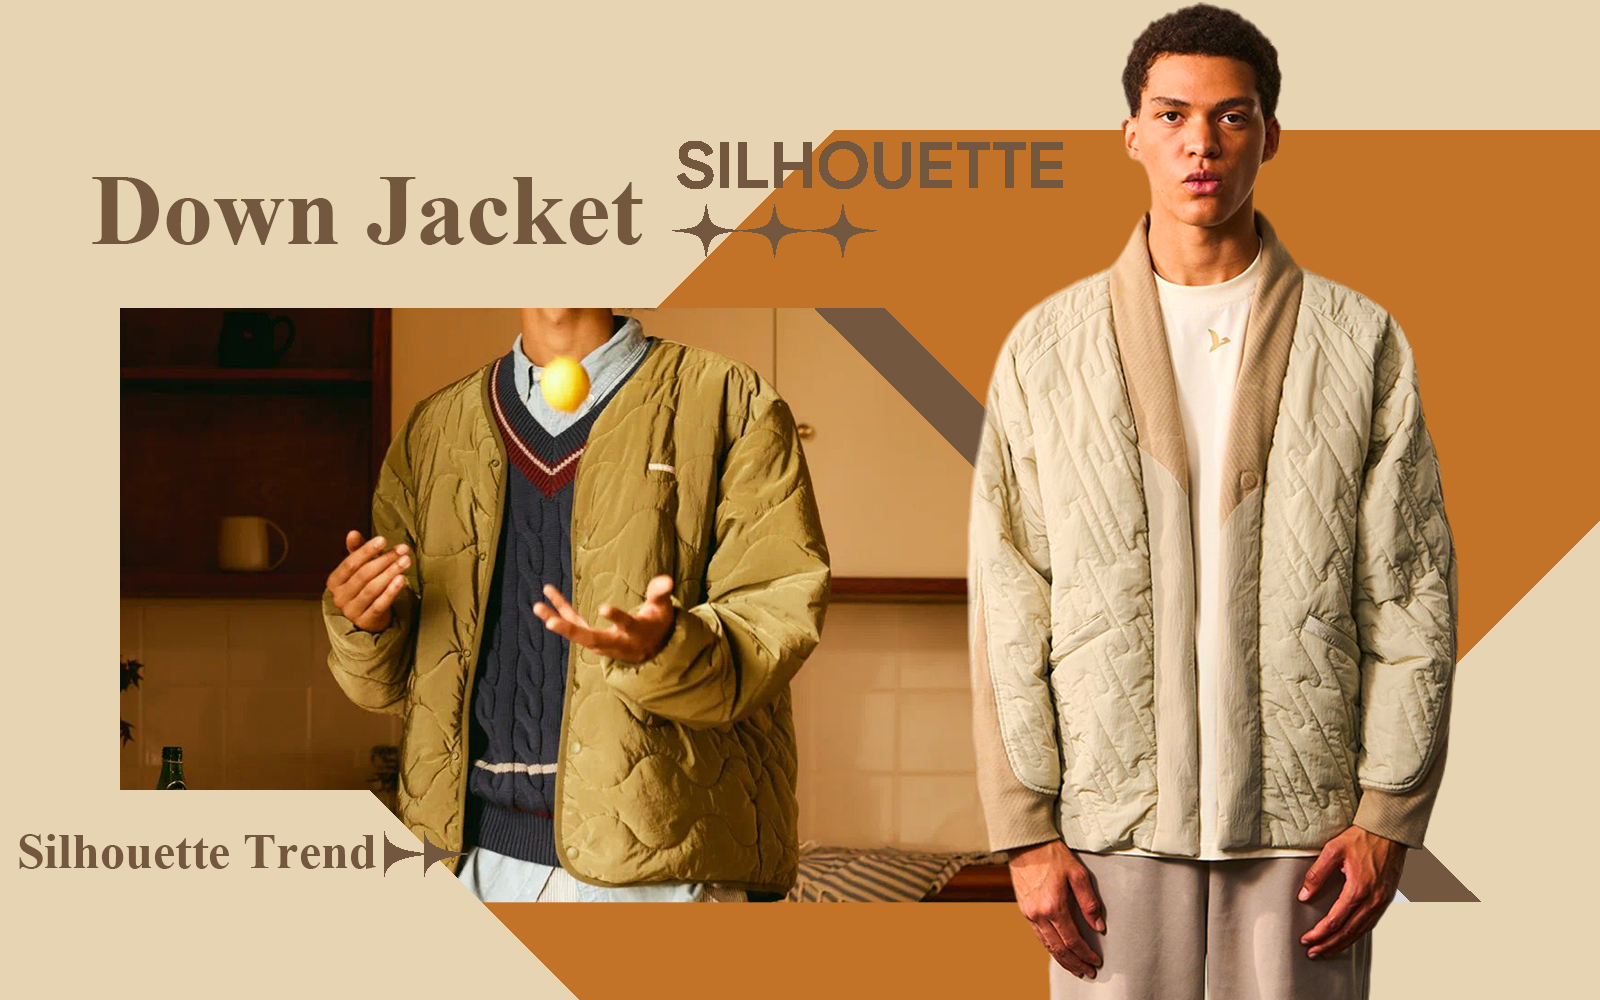 Lightweight Innovation -- The Silhouette Trend for Men's Down Jacket